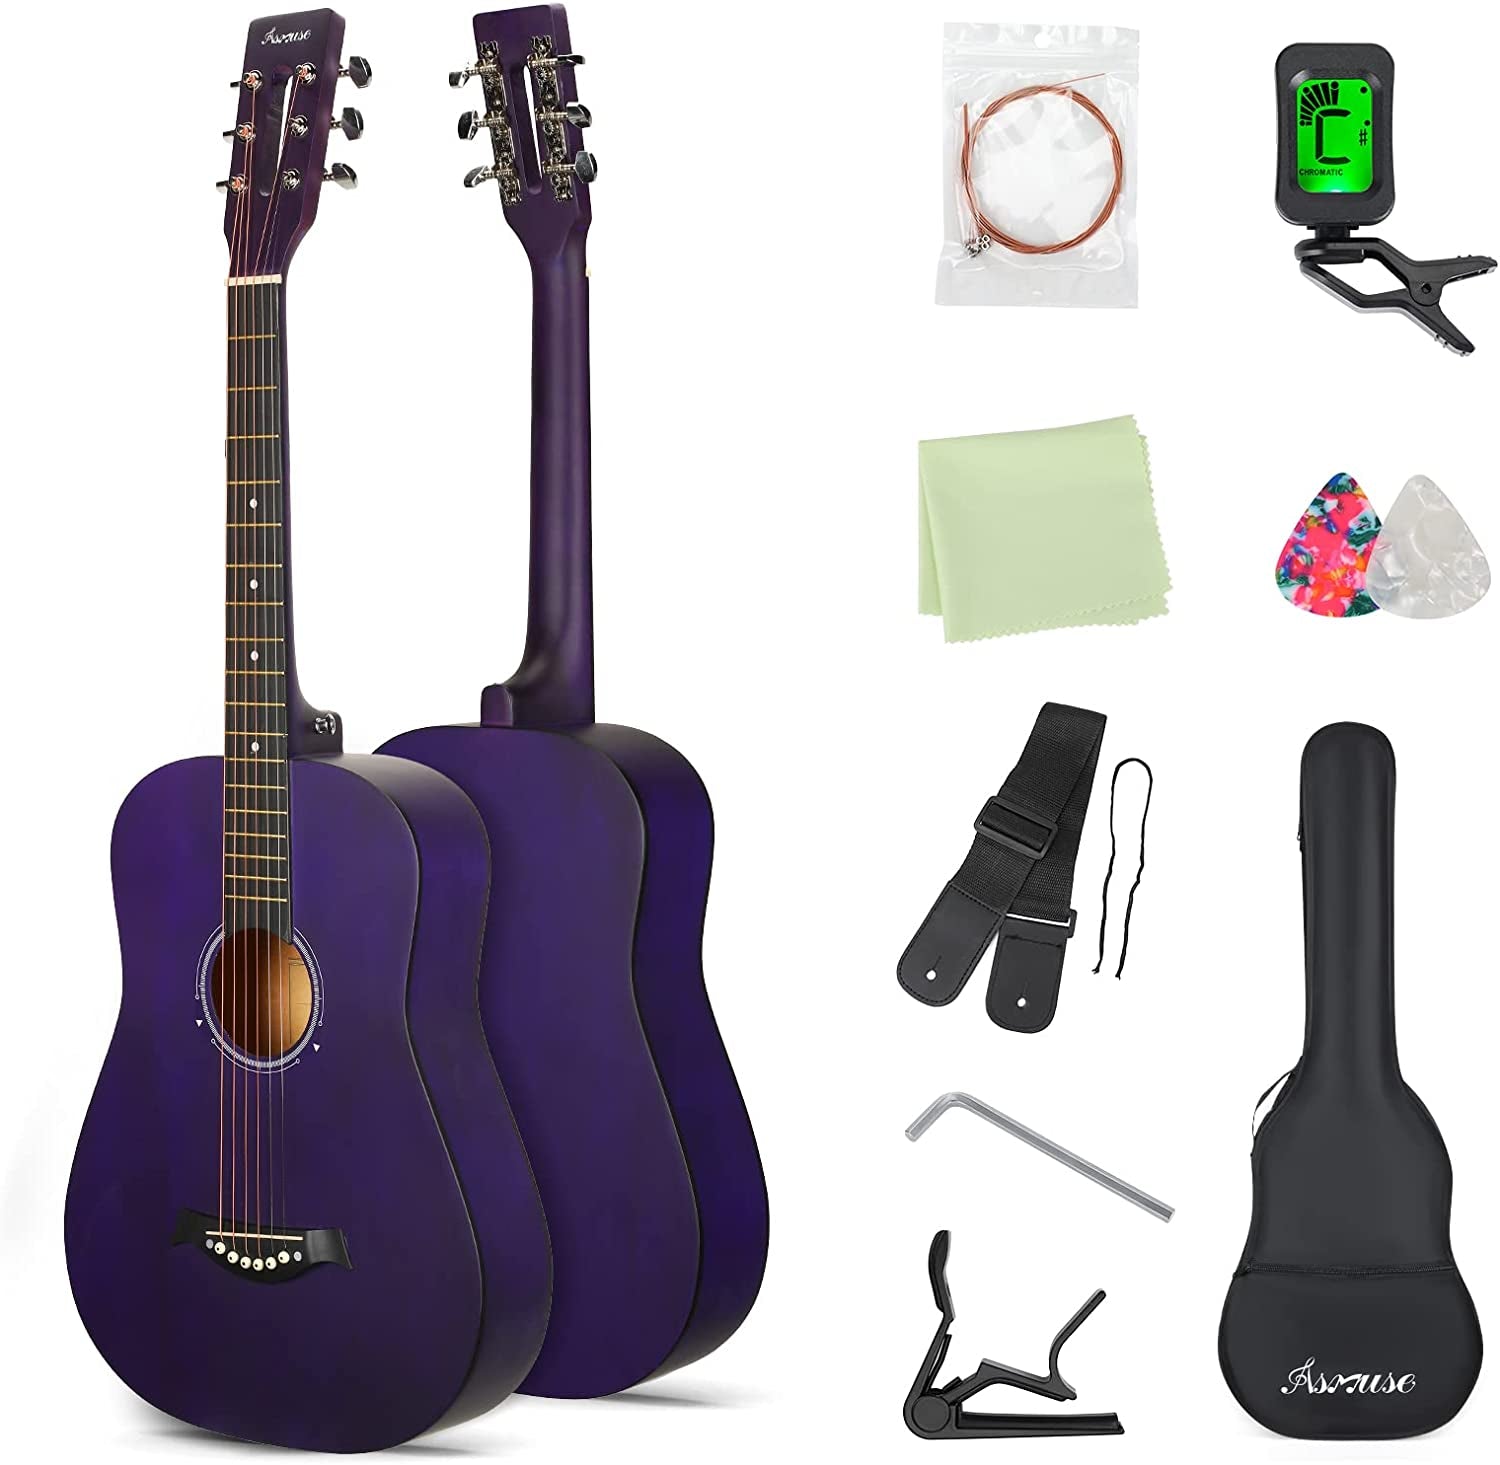 Full Size Classical Acoustic Guitar Kit - 38 Inch, 6 Strings - Includes Gig Bag, Tuner, Picks, Strap - Perfect for Beginners, Adults, Teens - Elegant Purple Design